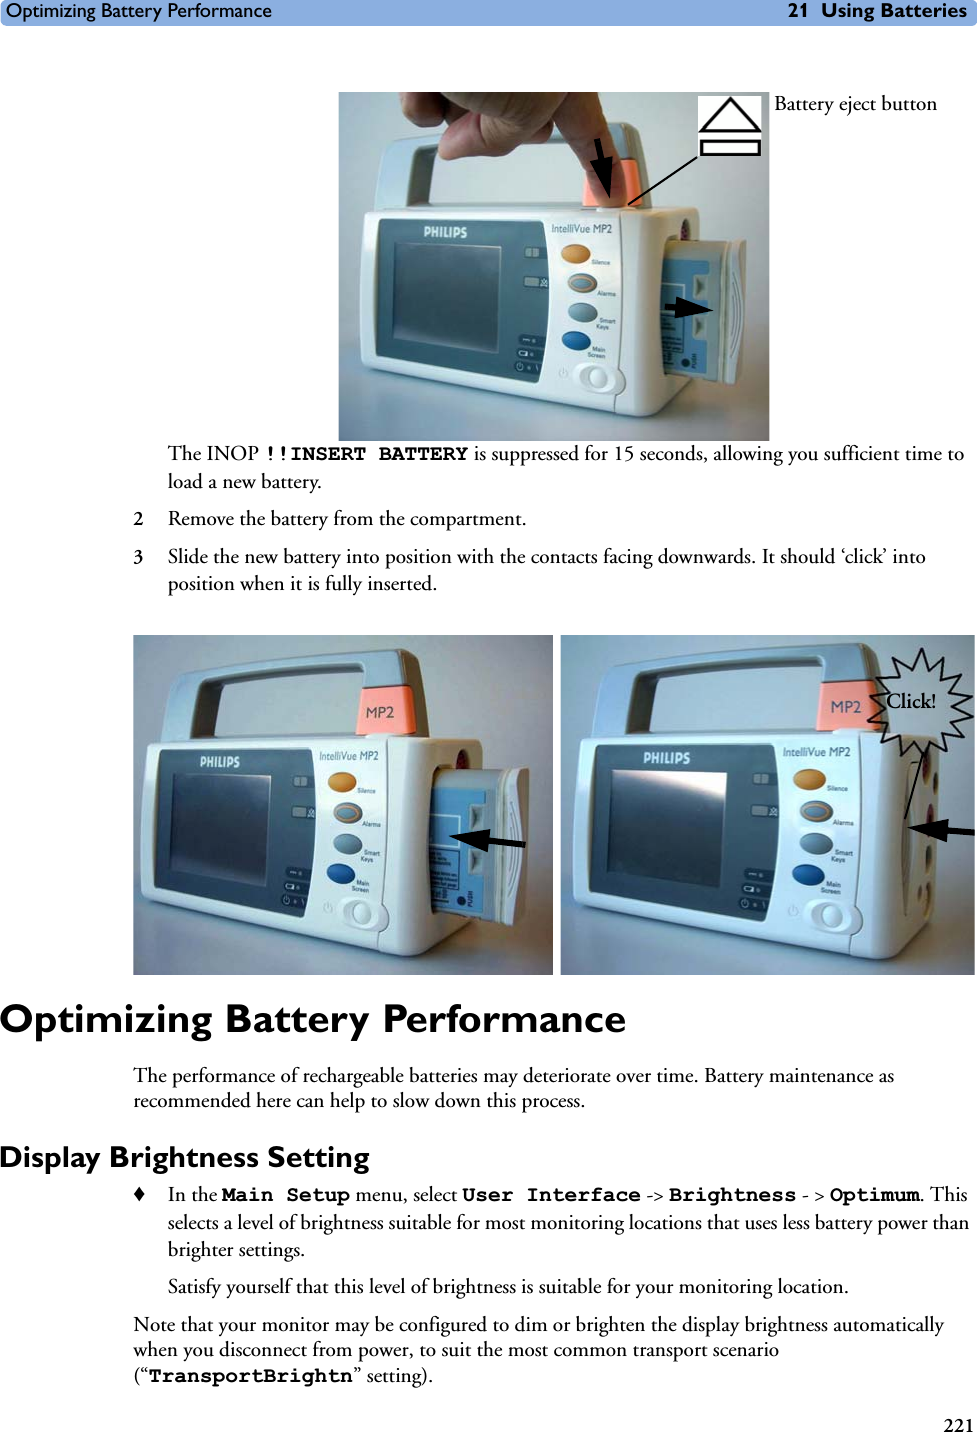 Optimizing Battery Performance 21 Using Batteries221The INOP !!INSERT BATTERY is suppressed for 15 seconds, allowing you sufficient time to load a new battery.2Remove the battery from the compartment.3Slide the new battery into position with the contacts facing downwards. It should ‘click’ into position when it is fully inserted.Optimizing Battery PerformanceThe performance of rechargeable batteries may deteriorate over time. Battery maintenance as recommended here can help to slow down this process.Display Brightness Setting ♦In the Main Setup menu, select User Interface -&gt; Brightness - &gt; Optimum. This selects a level of brightness suitable for most monitoring locations that uses less battery power than brighter settings. Satisfy yourself that this level of brightness is suitable for your monitoring location. Note that your monitor may be configured to dim or brighten the display brightness automatically when you disconnect from power, to suit the most common transport scenario (“TransportBrightn” setting). Battery eject buttonClick!